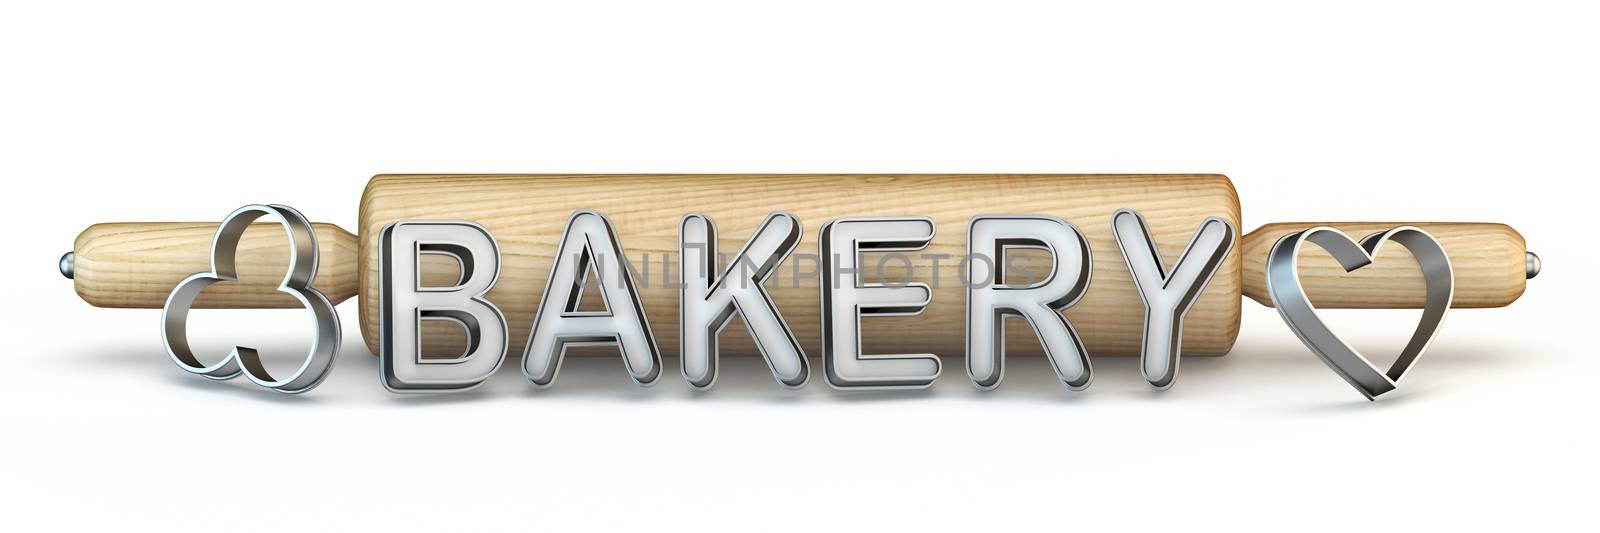 Wooden rolling pin, BAKERY text and cookie cutter 3D by djmilic